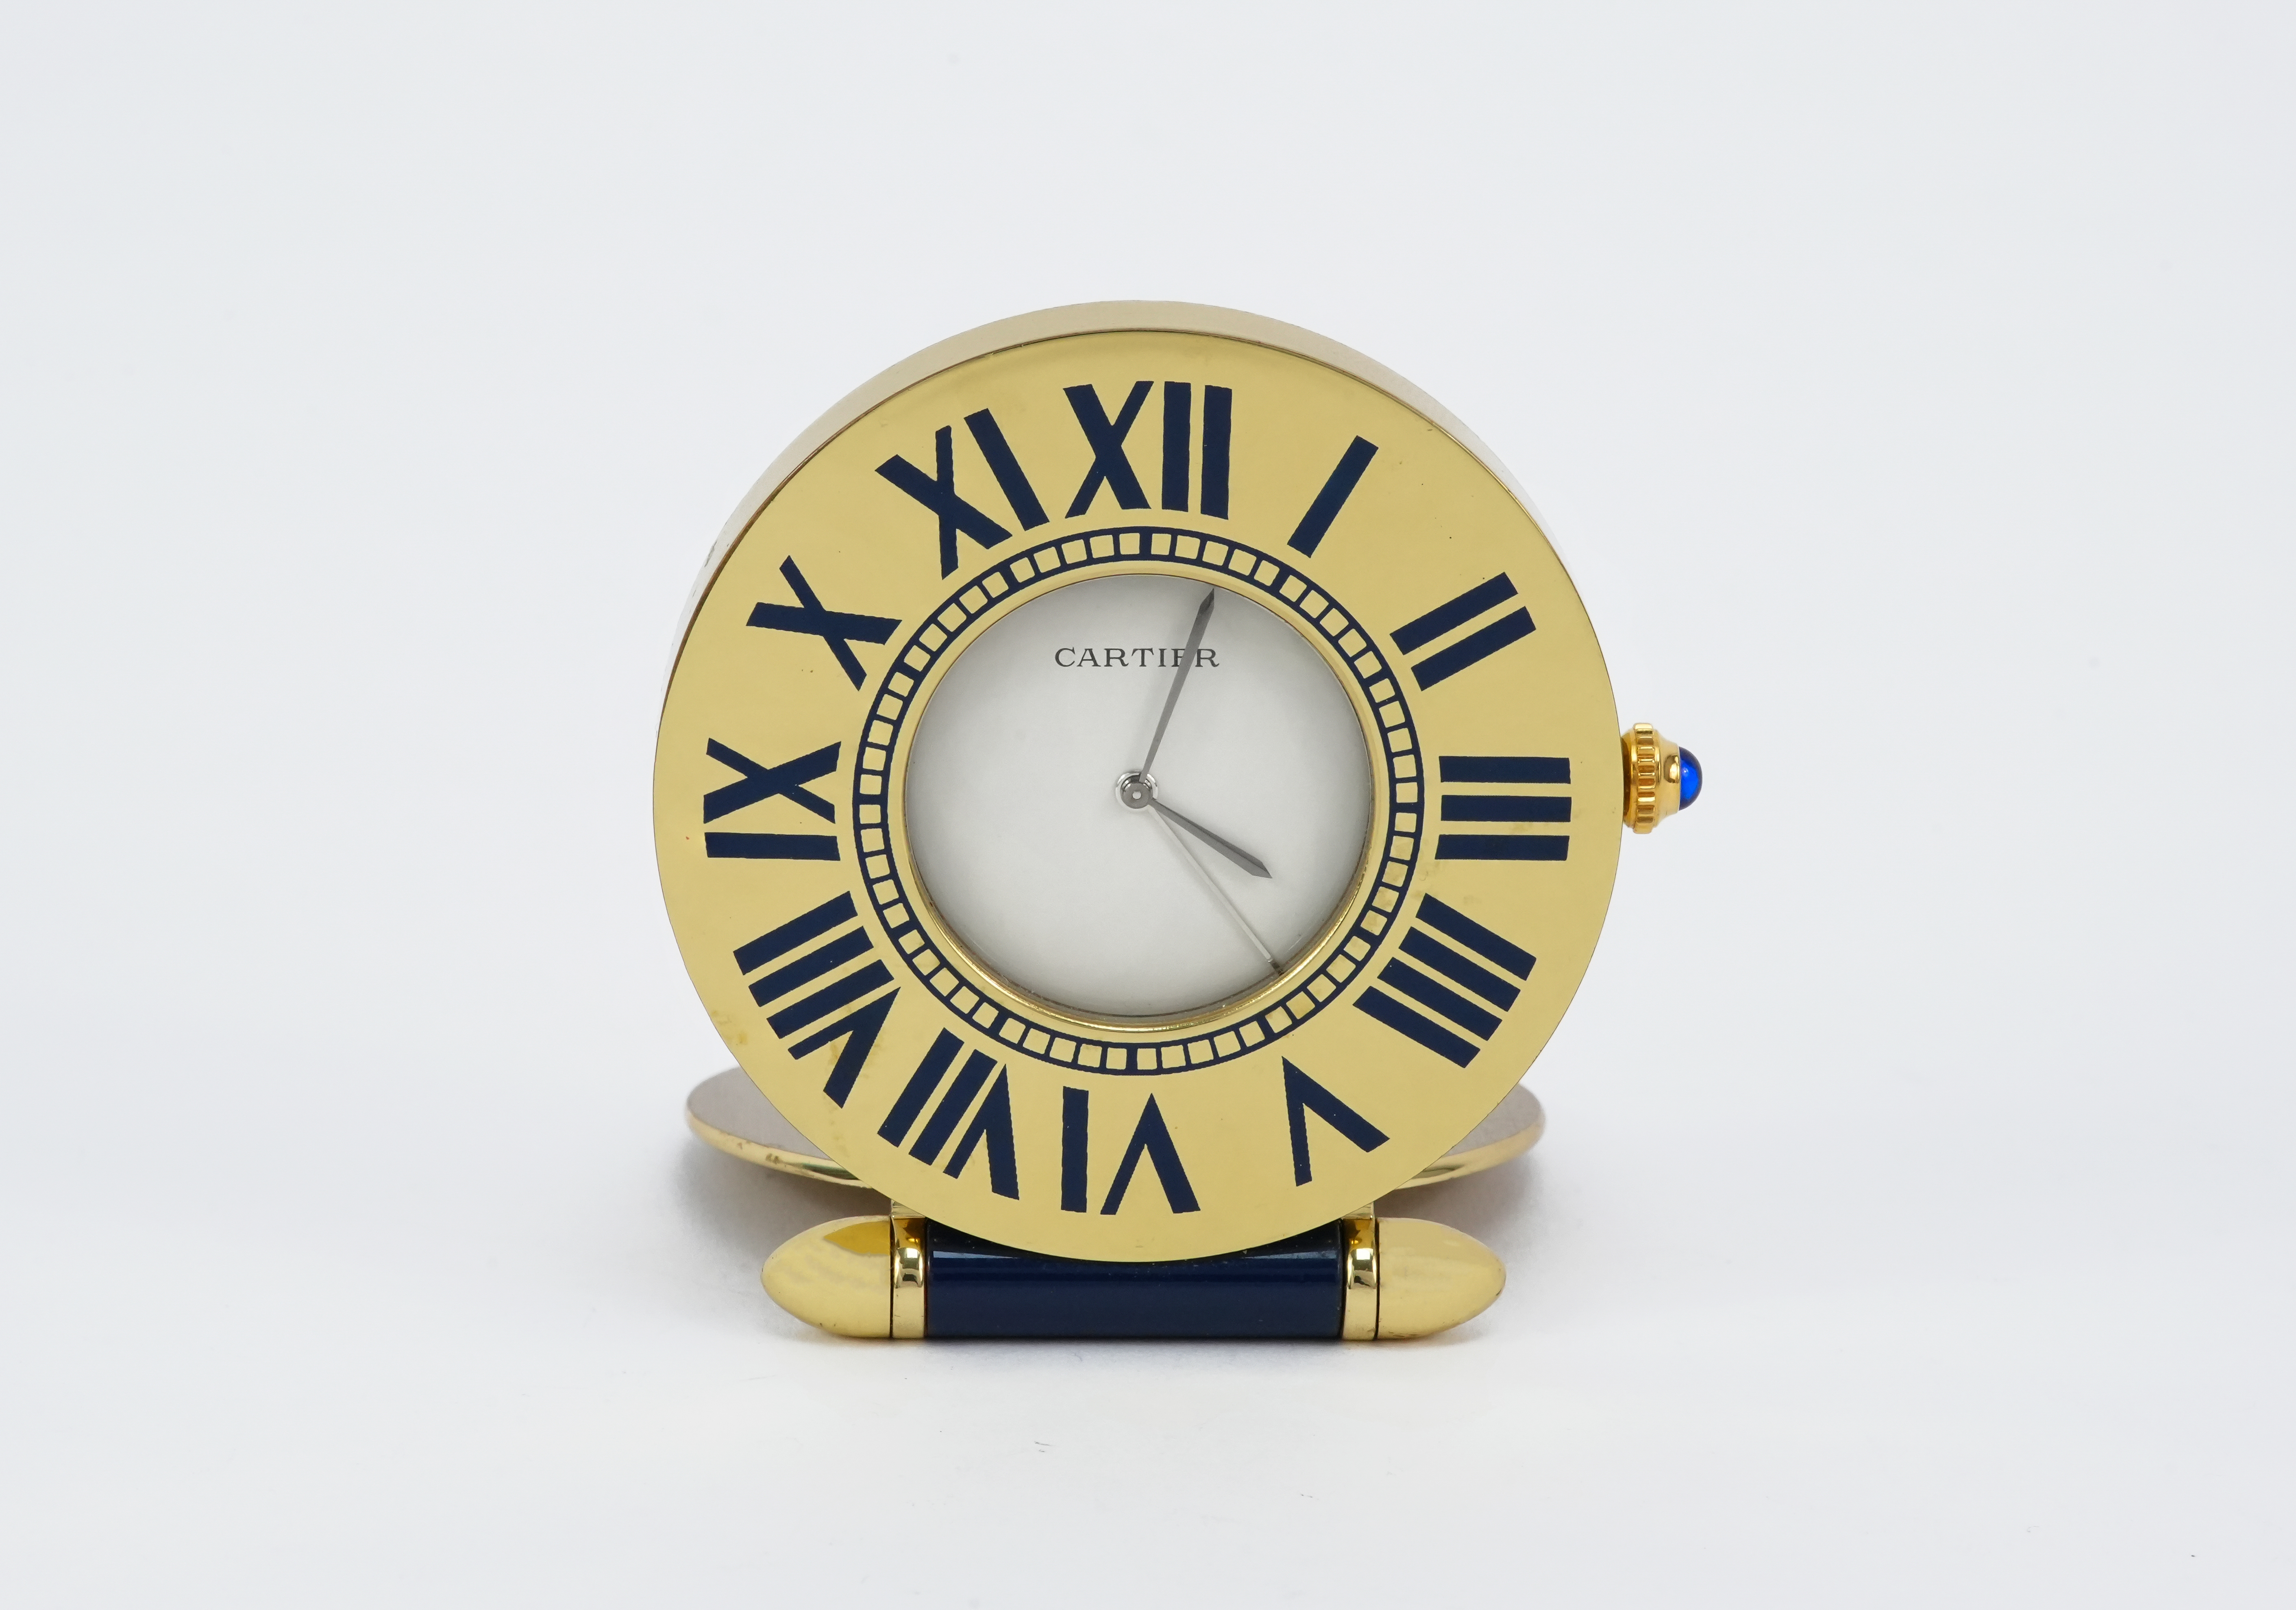 Cartier Brass and Blue Enamel Travel Clock - Image 2 of 4